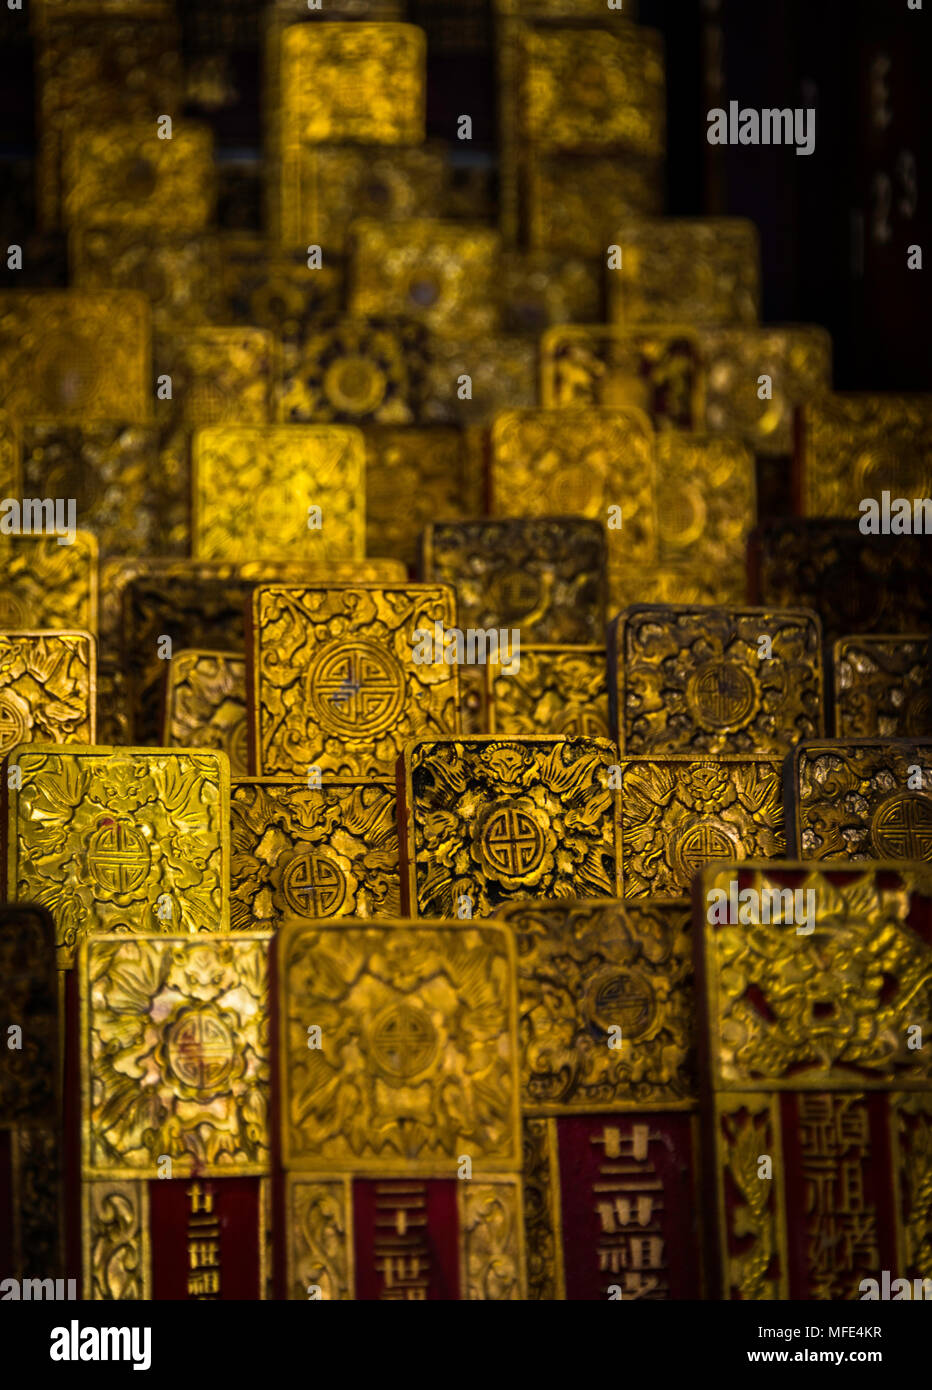 Altar with Golden Pedigrees, Memorial Plaques in the Pedigree Temple, Leong San Tong Khoo Kongsi, Chinese Clan House, Temple Stock Photo